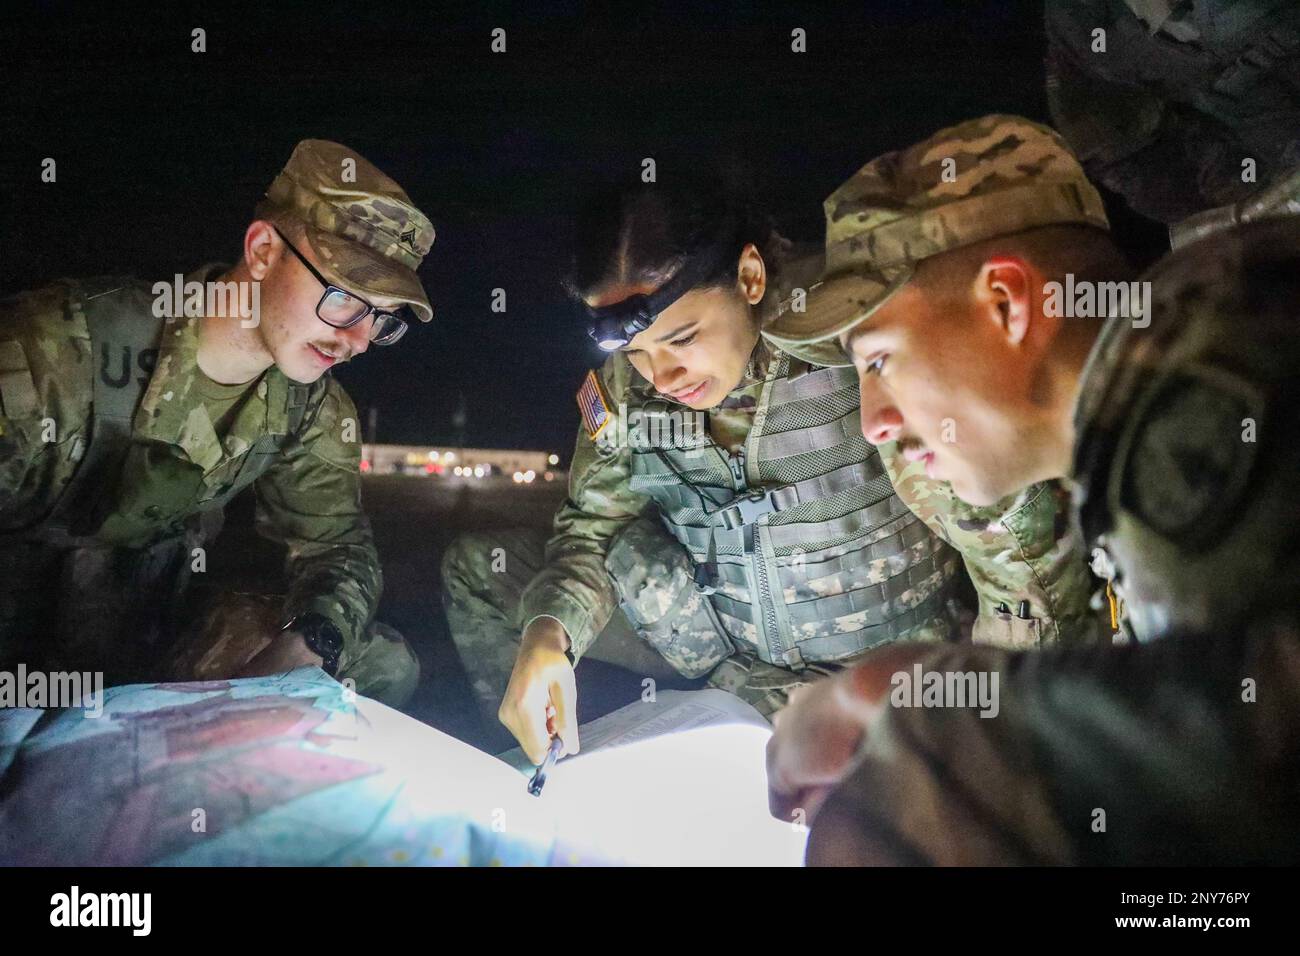 Sgt. Maximilian Lord, Spc. Brittani Schultz and Spc. Victor Graza, members of the 716th Military Police Battalion's Best Squad, discuss the quickest route towards their grid coordinates during the 16th Military Police Brigade Best Squad Competition on Fort Stewart, Georgia, Jan. 24, 2023. Competition events are a test of grit and toughness, foster readiness and esprit de corps, and are a fundamental part of building lethal, cohesive teams and expert leaders. Stock Photo